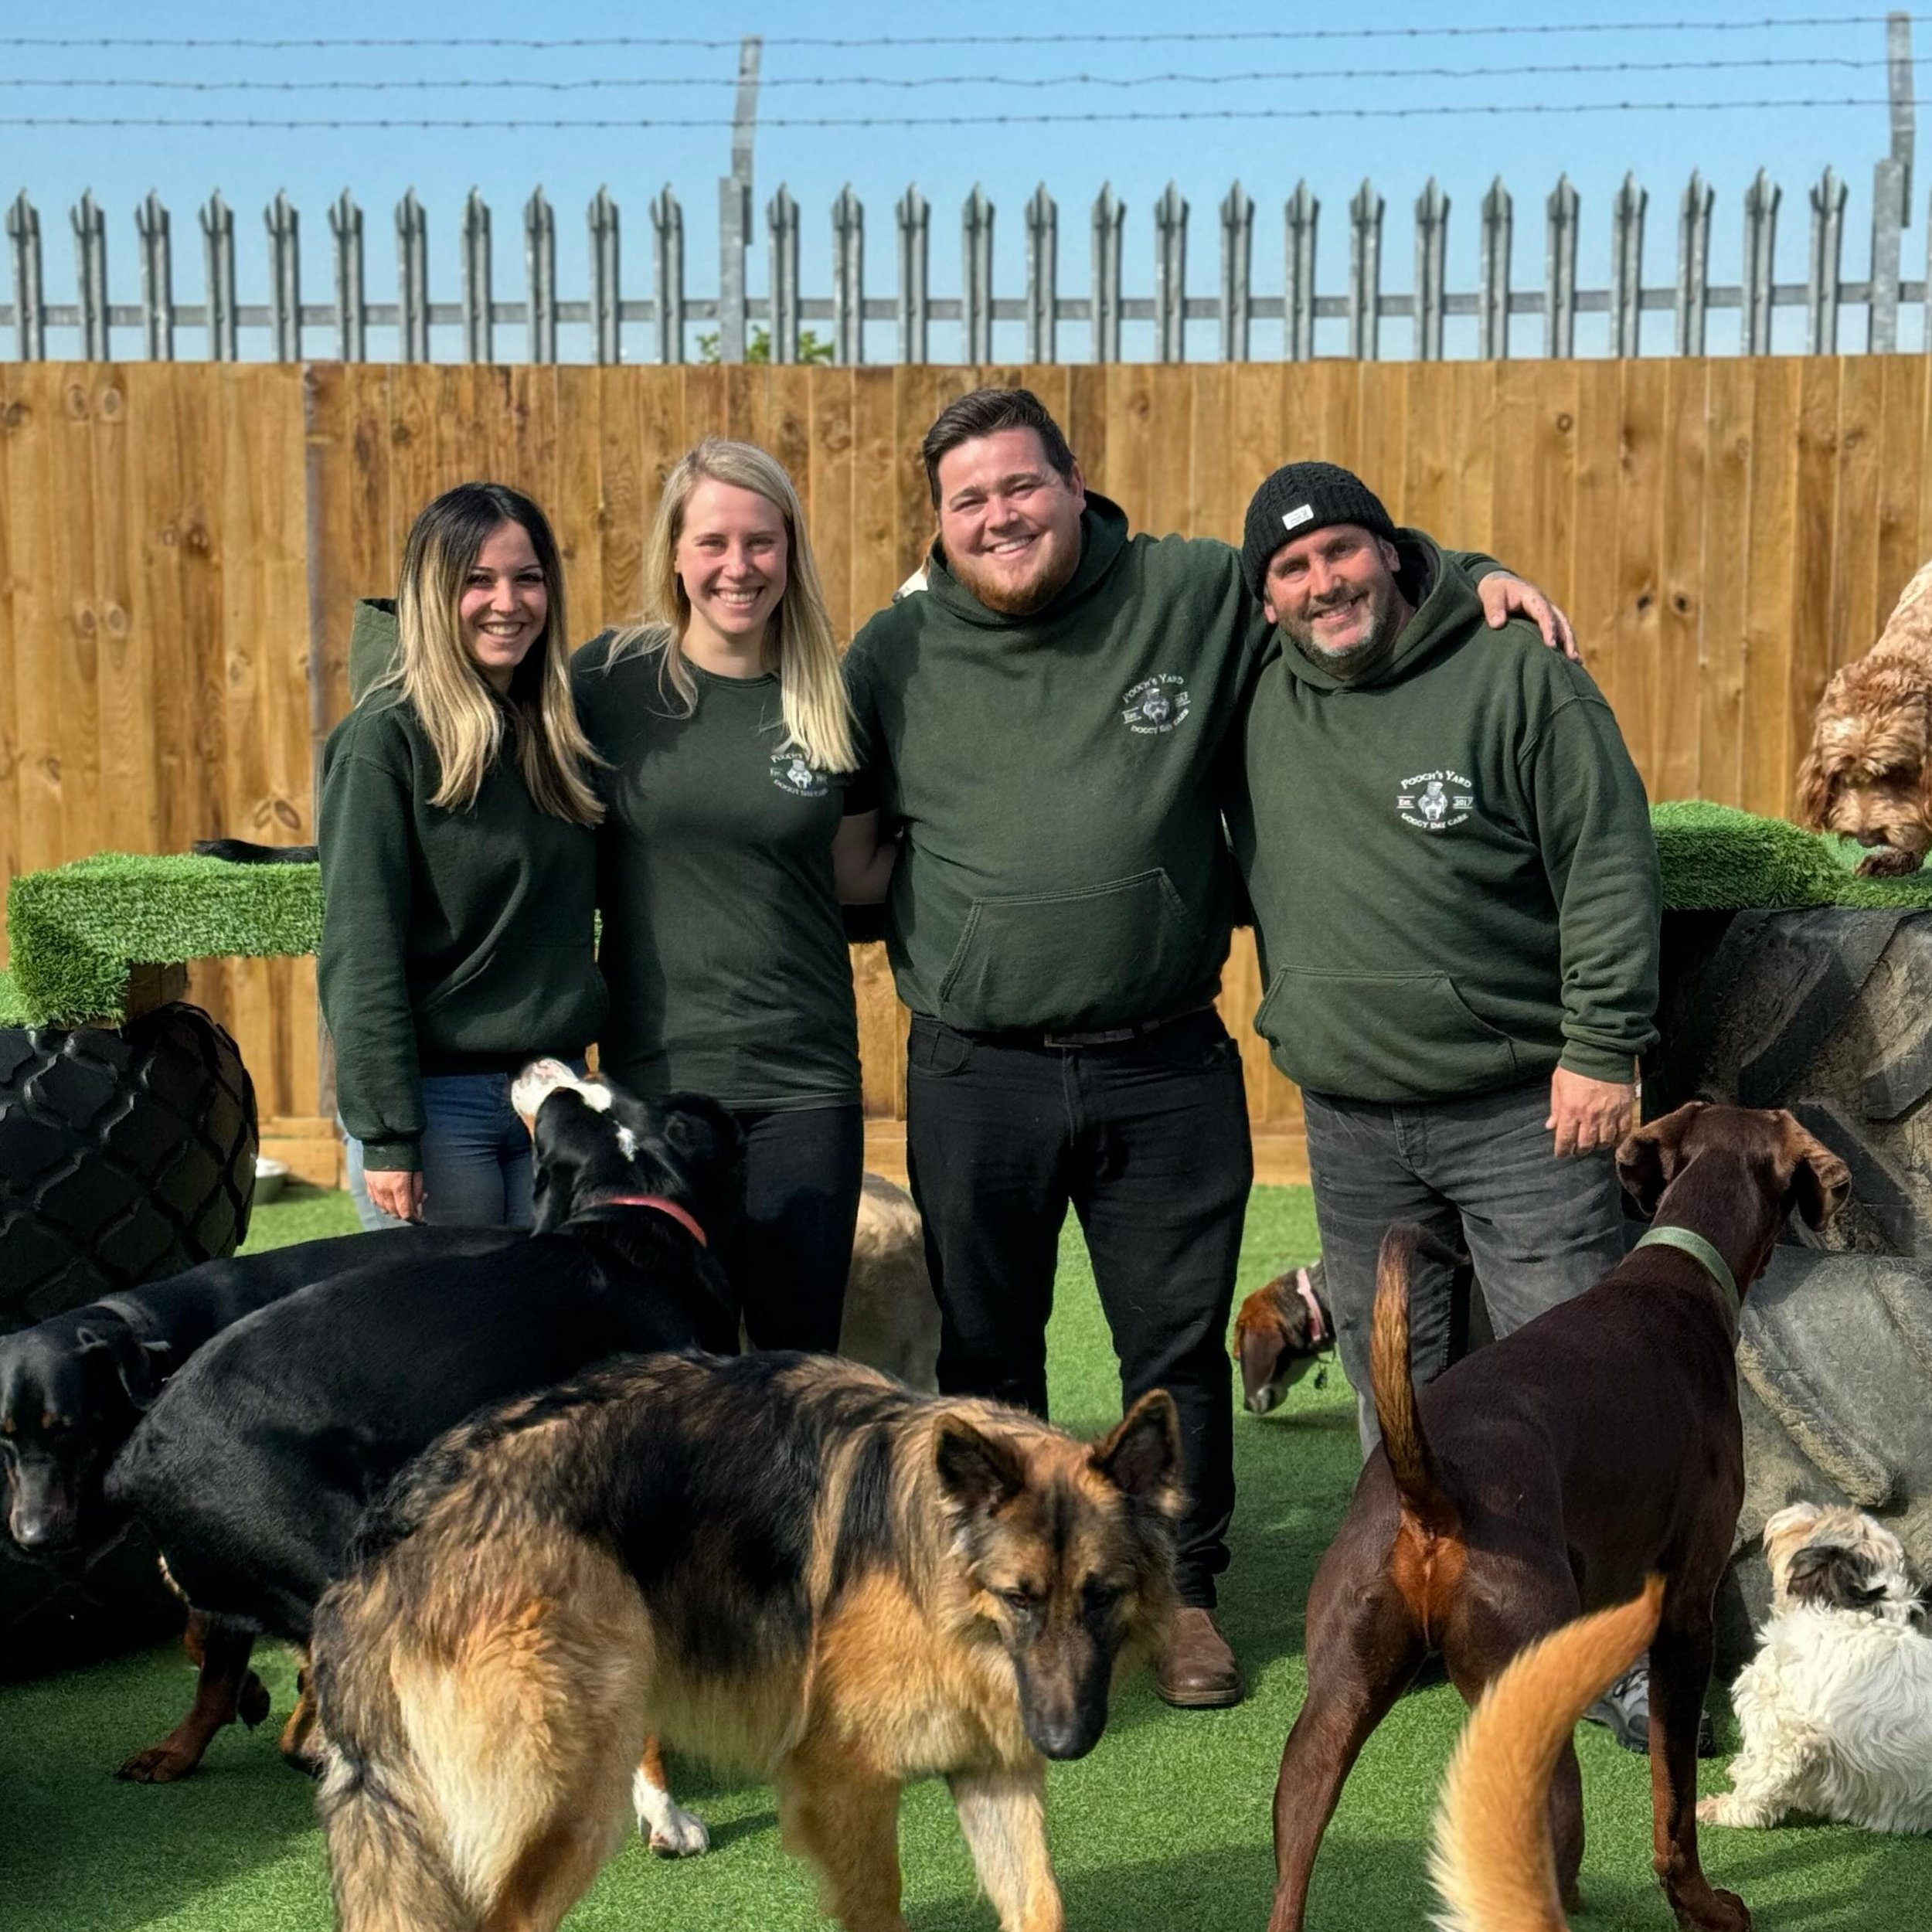 Team Pooch&rsquo;s Yard!! 🐾
&mdash;
We are now sorting through all the applications we&rsquo;ve received. We&rsquo;ve had over 300 people apply so as you can imagine&hellip; it&rsquo;s taking a lot of time to go through them. Please bear with us, we